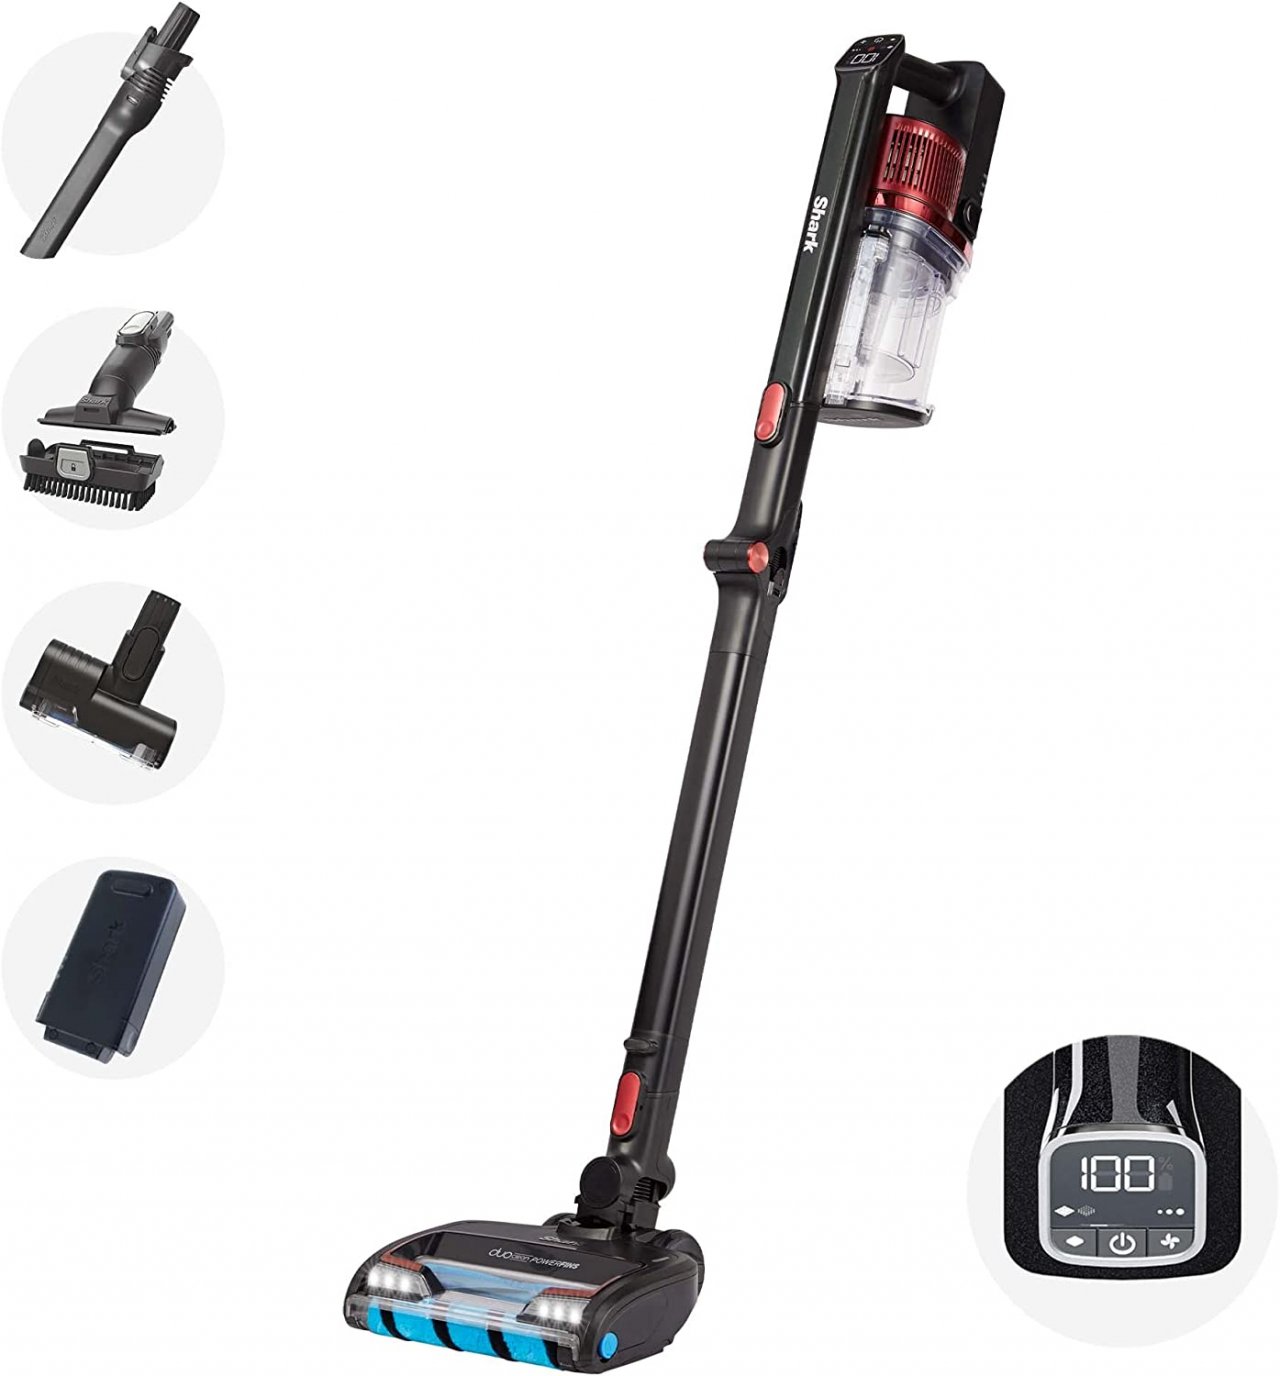 The Shark Cordless Vacuum is one of our highest rated cordless vacuums and available for Black Friday.